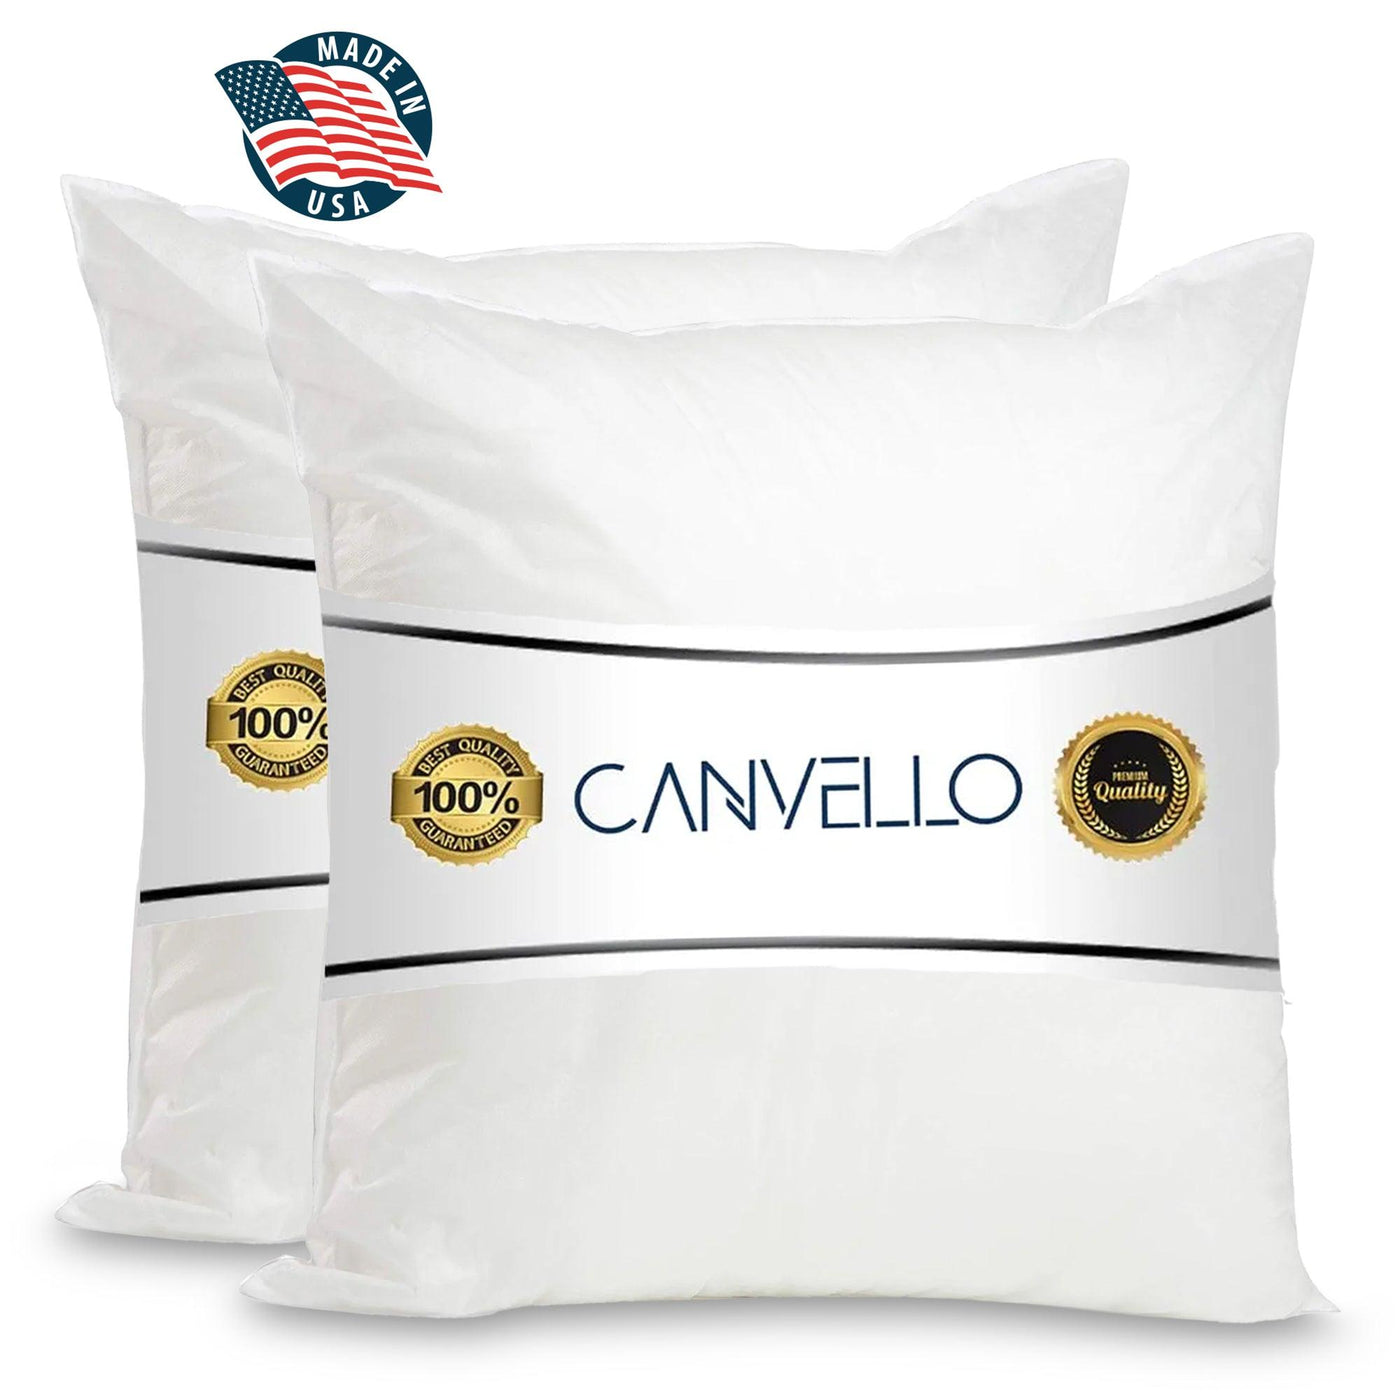 https://canvellostudio.com/cdn/shop/files/canvello-decorative-pillow-inserts-throw-pillow-insert-down-feather-fill-for-extra-fluff-with-233-thread-count-100percent-cotton-cover-quality-checked-in-u-s-a-canvello-18_0ce62020-48d5-4652-9fda-fba4fe0a4f31_1400x.jpg?v=1688097388